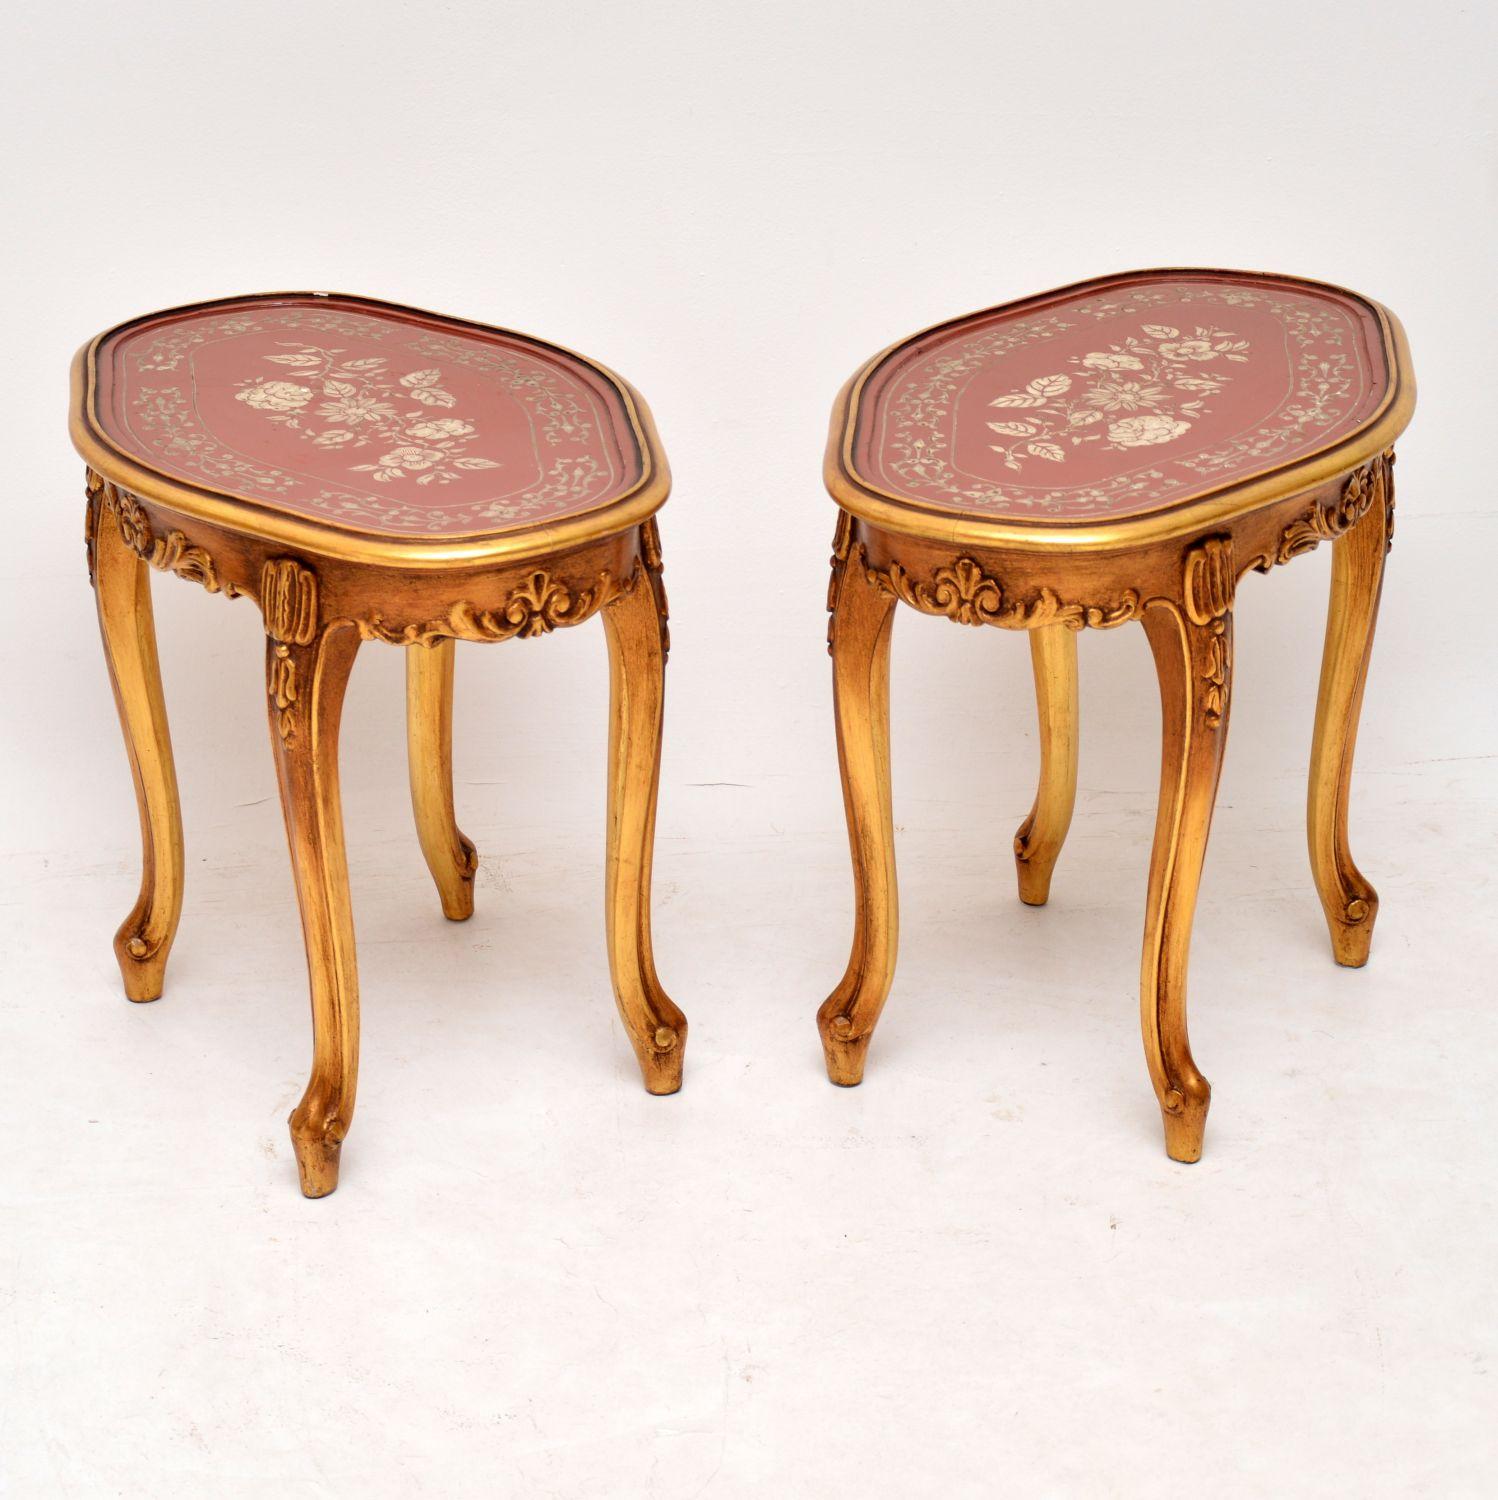 20th Century Pair of Antique French Style Gilt Wood Side Tables